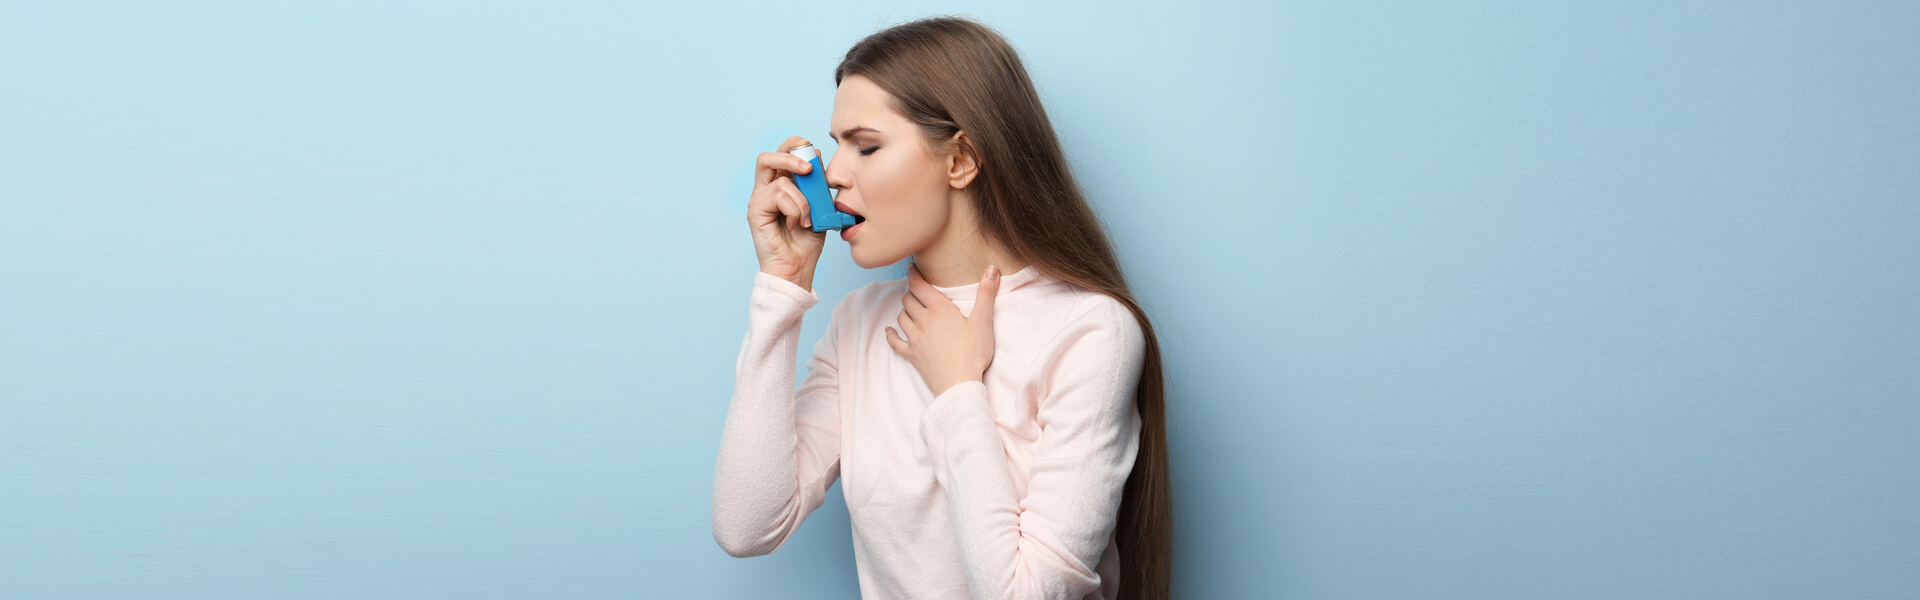 Asthma and Chronic Obstructive Pulmonary Disease (Copd): Is There a Connection?